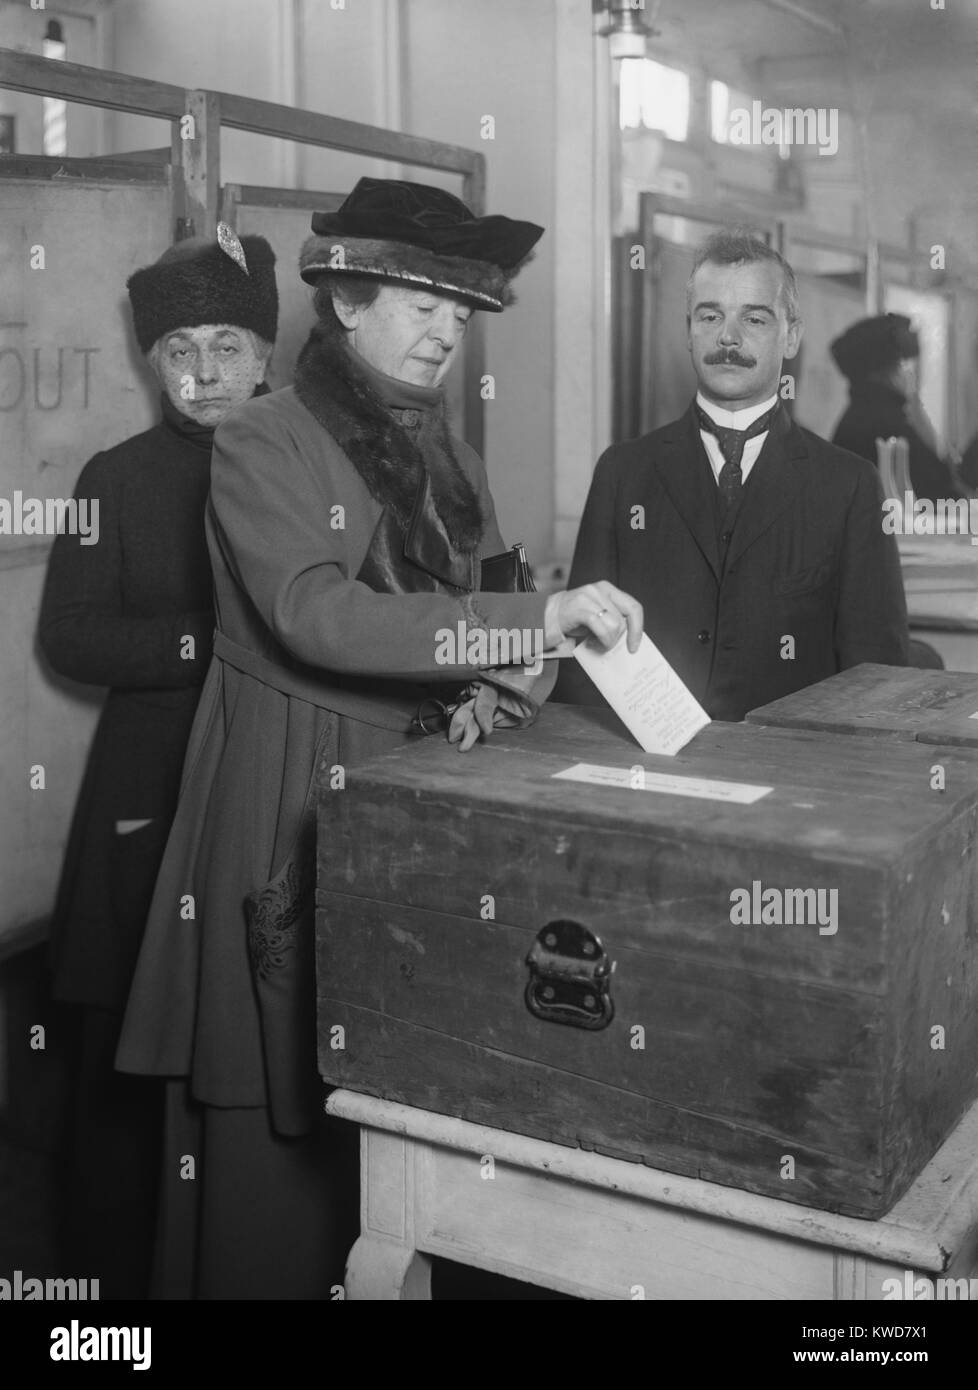 American woman votes, ca. 1920. The 1920 election was the first time all American female citizens over 21 were able to vote for a U.S. President. (BSLOC 2015 16 189) Stock Photo